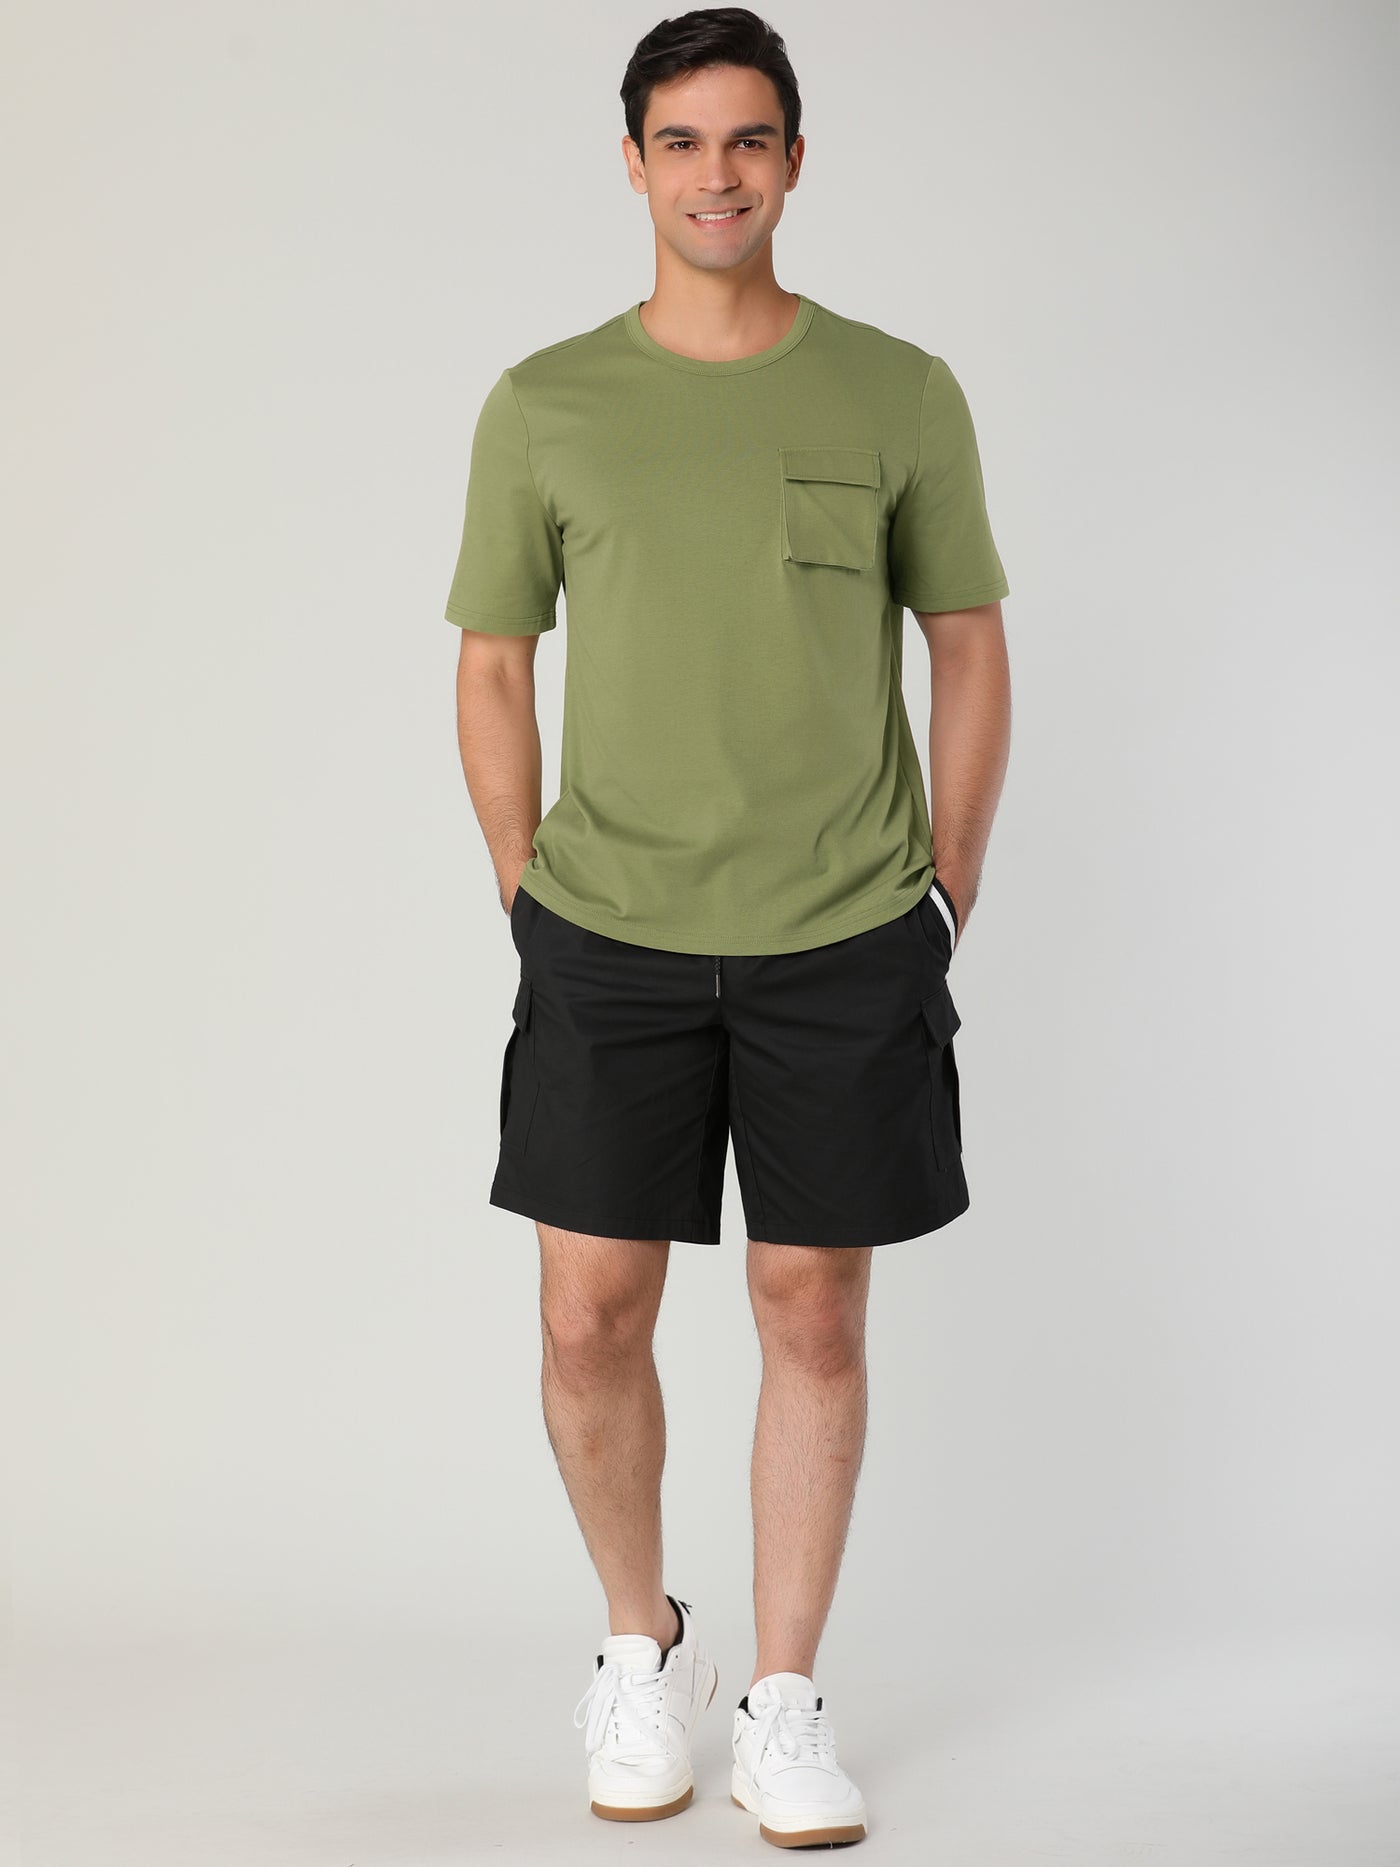 Bublédon Casual Crew Neck Short Sleeve Solid Pocket T-shirts